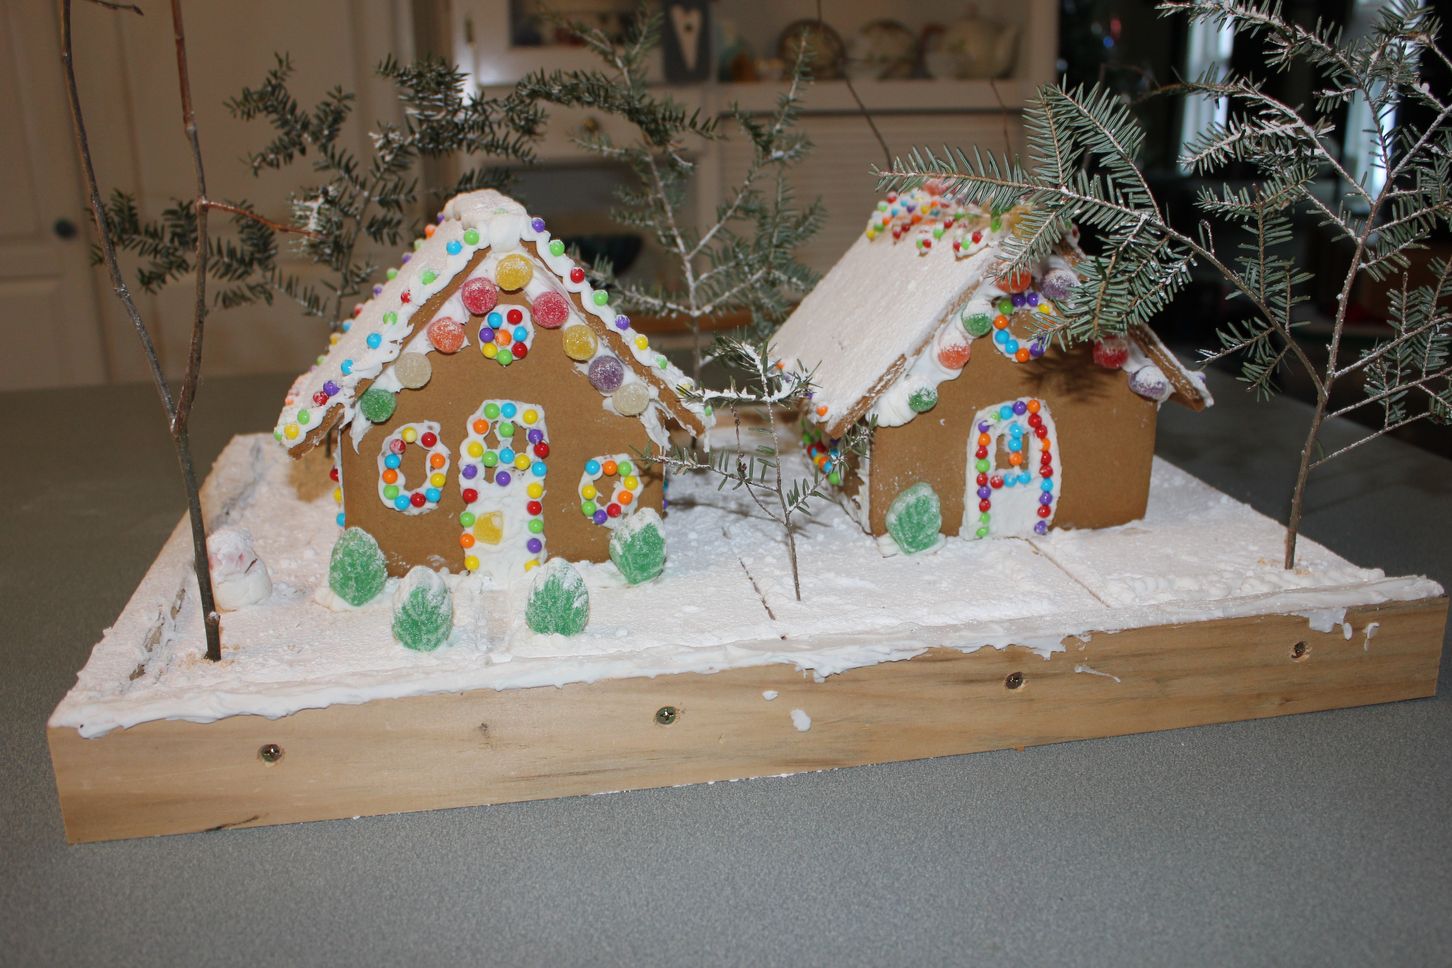 Our gingerbread houses for Christmas 2013.